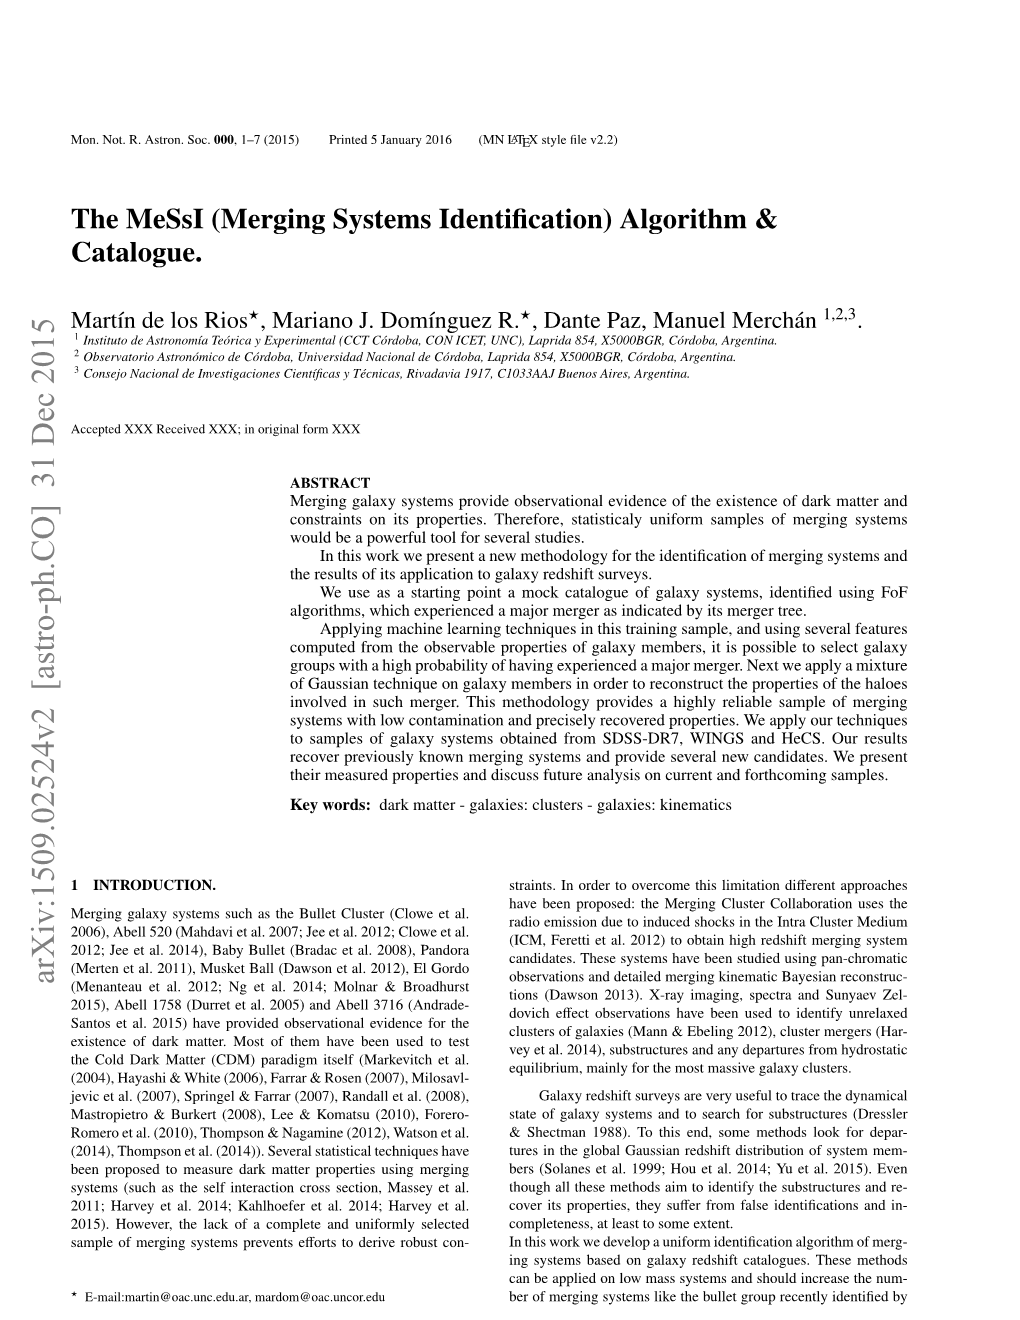 The Messi (Merging Systems Identification) Algorithm & Catalogue